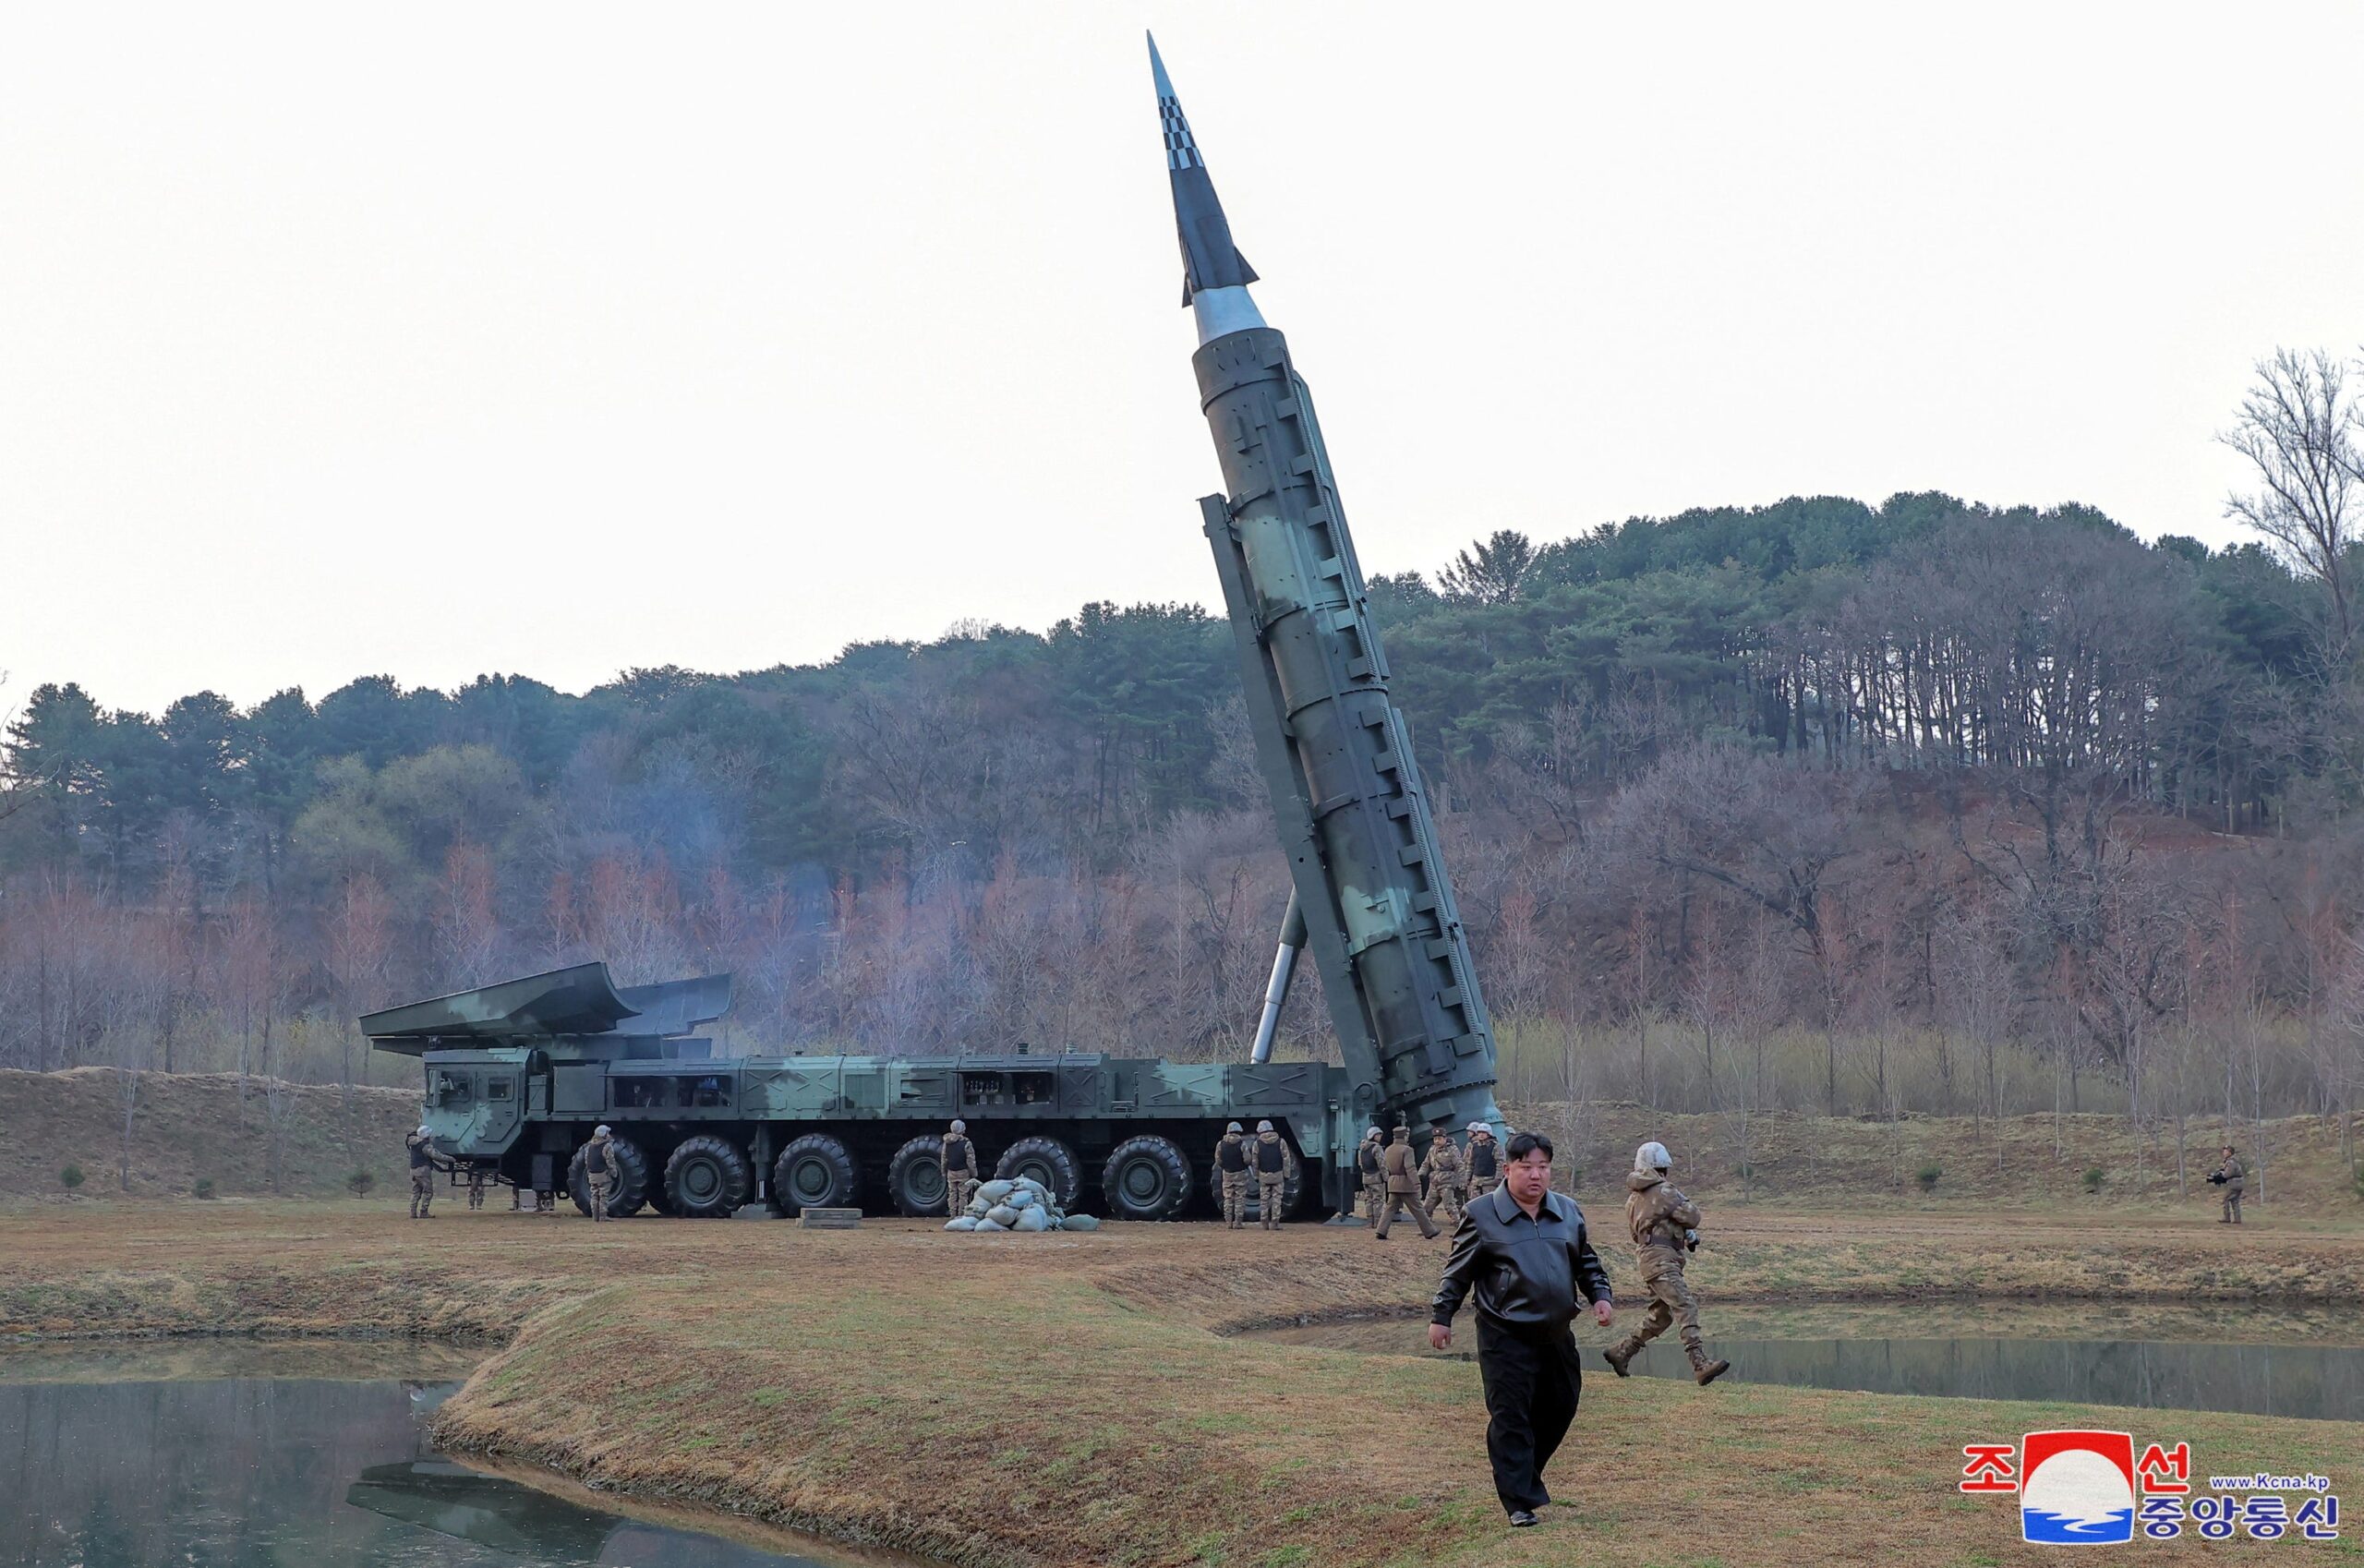 Kim Jong-un attends a test launch of a missile.